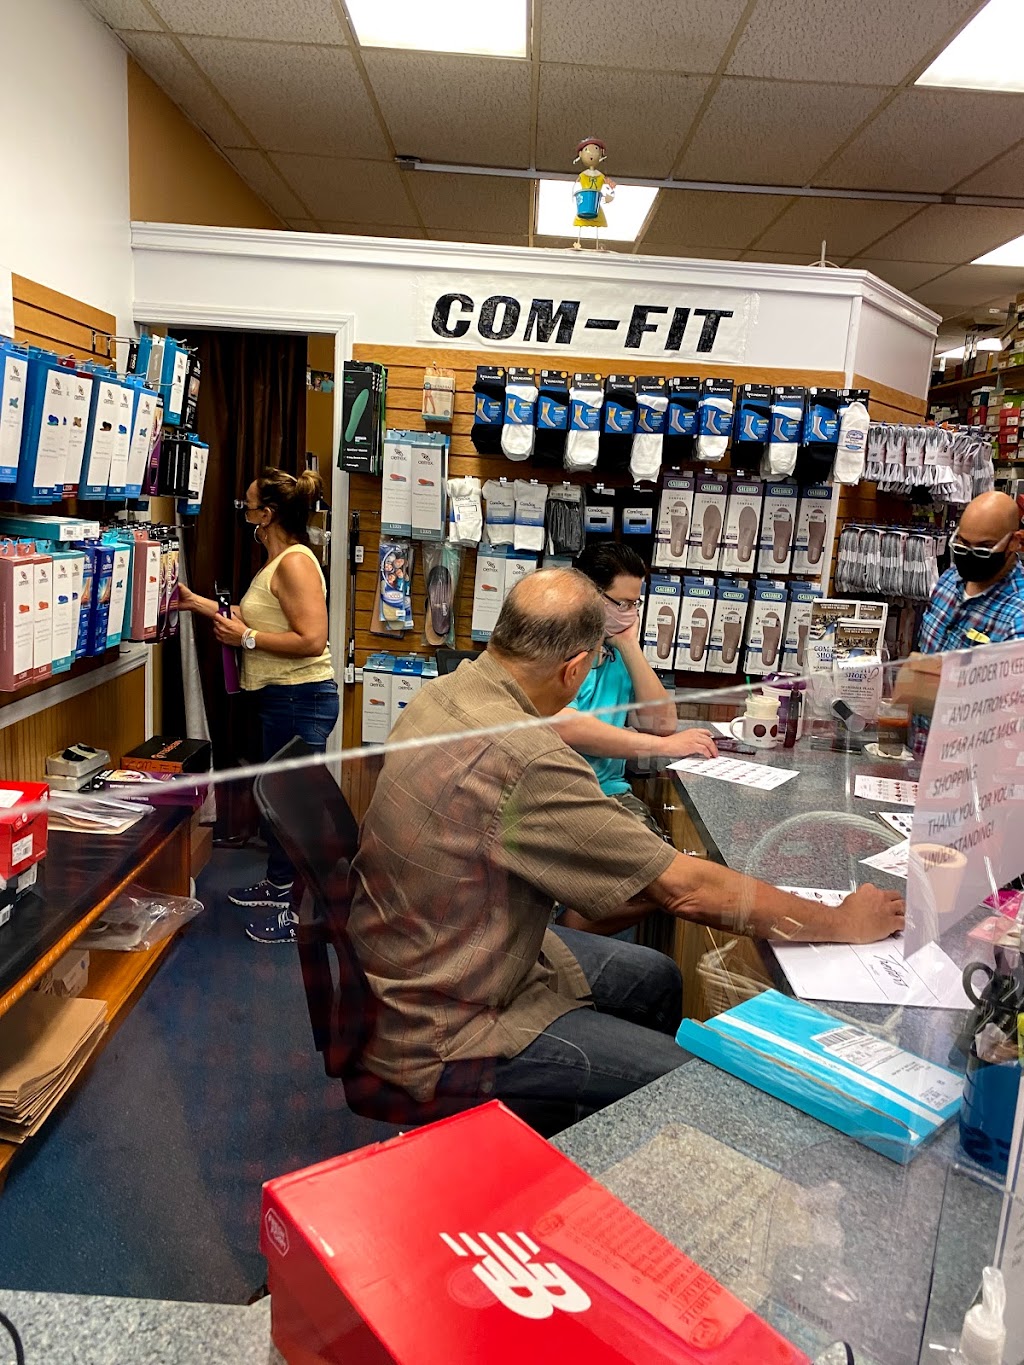 Com-Fit Shoes | 455 Central Park Ave, Scarsdale, NY 10583 | Phone: (914) 358-4027